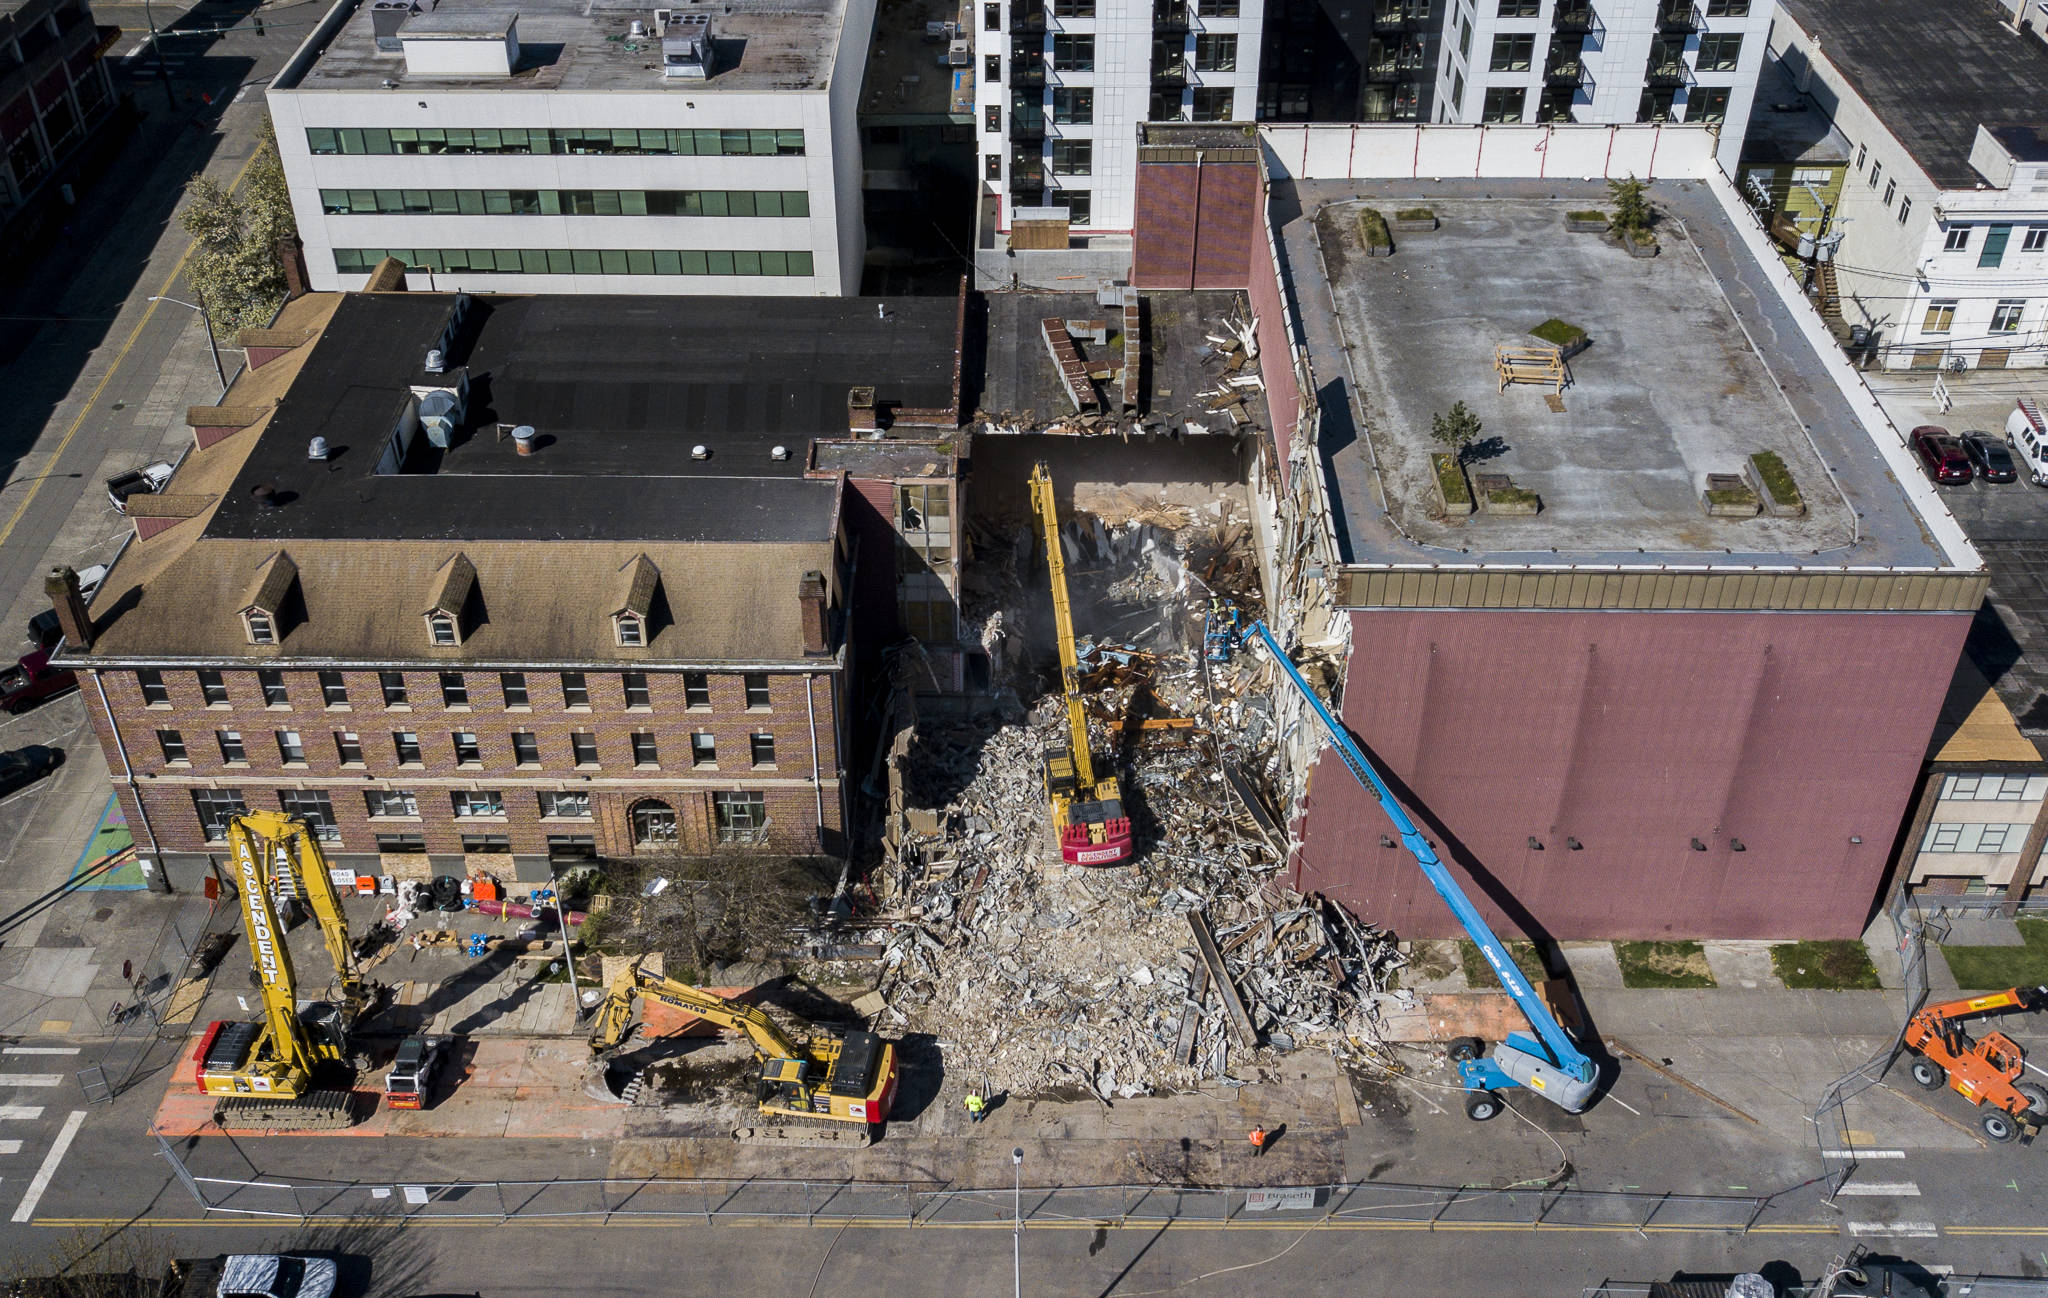 Crews work on the demolition of the former YMCA annex in downtown Everett on Tuesday. (Olivia Vanni / The Herald)